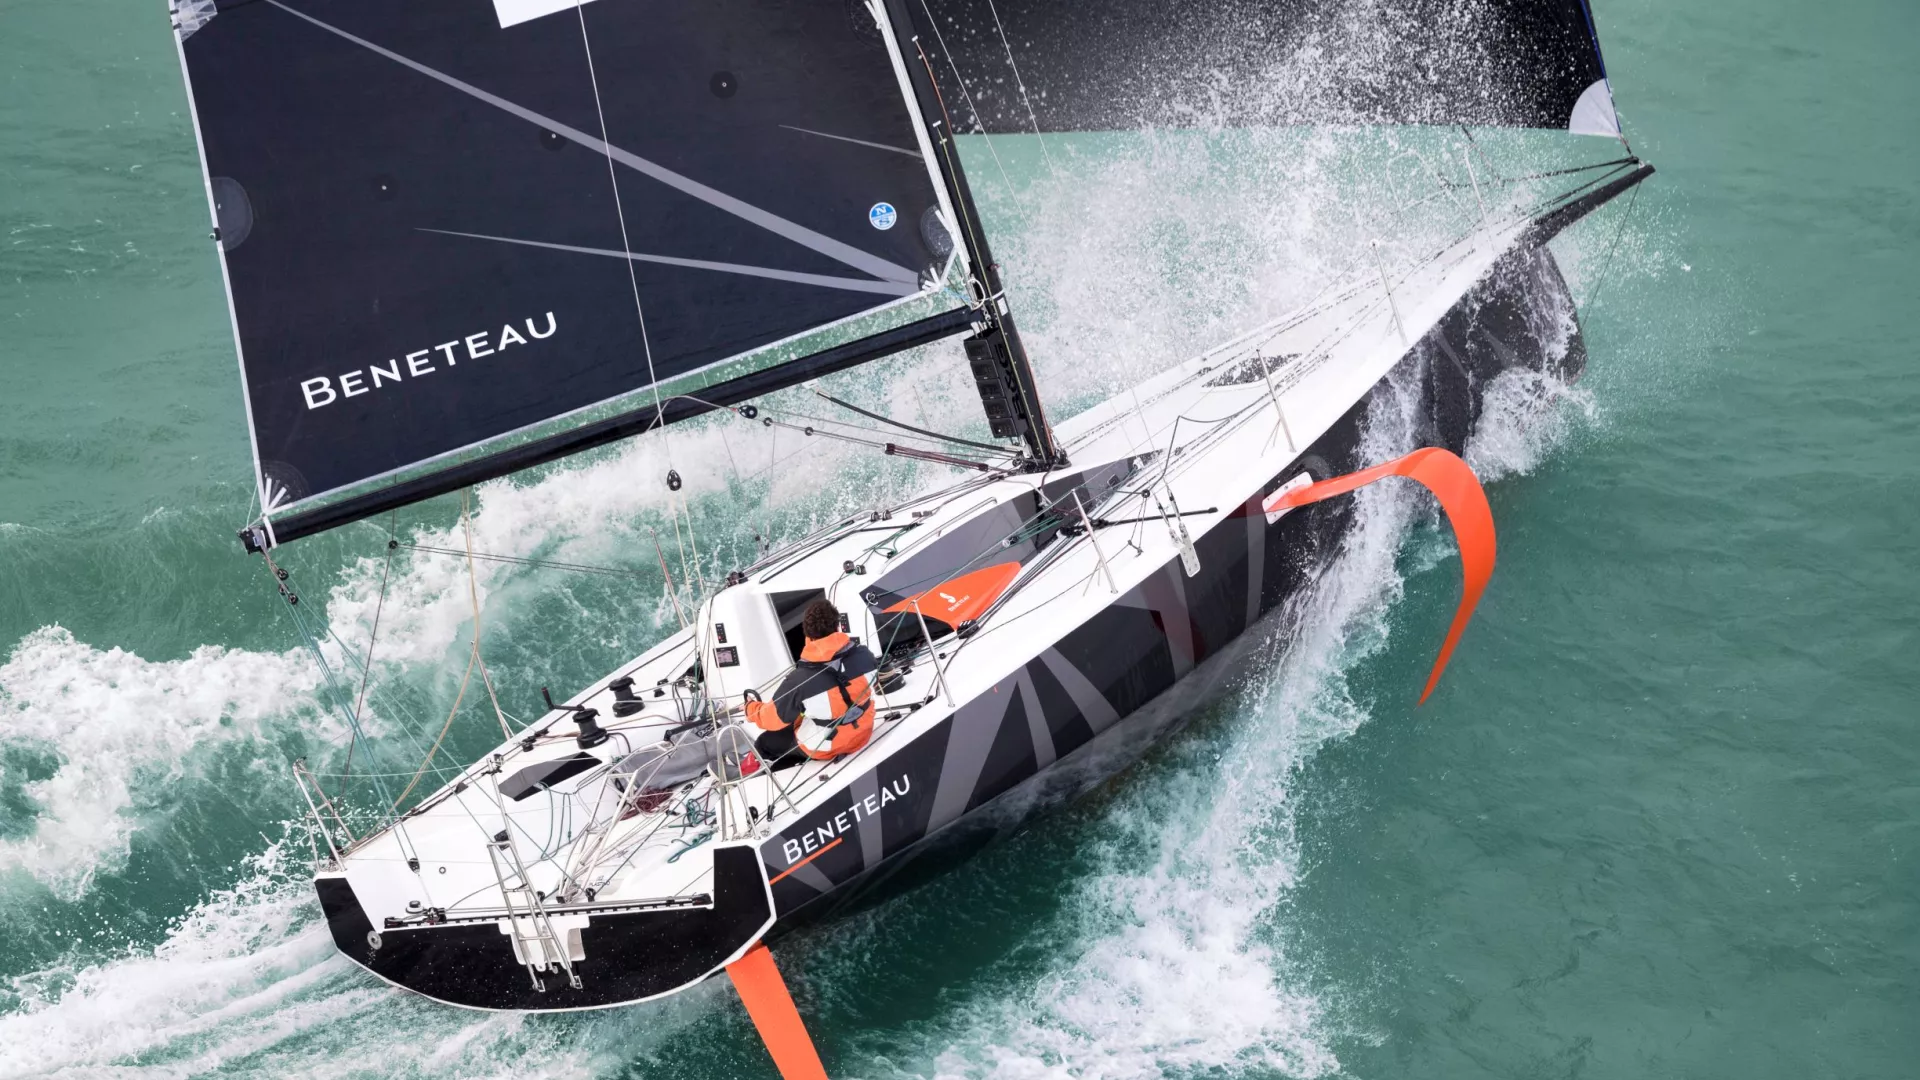 BENETEAU | The Reference in Cruising & Performance Sailboats since 1884